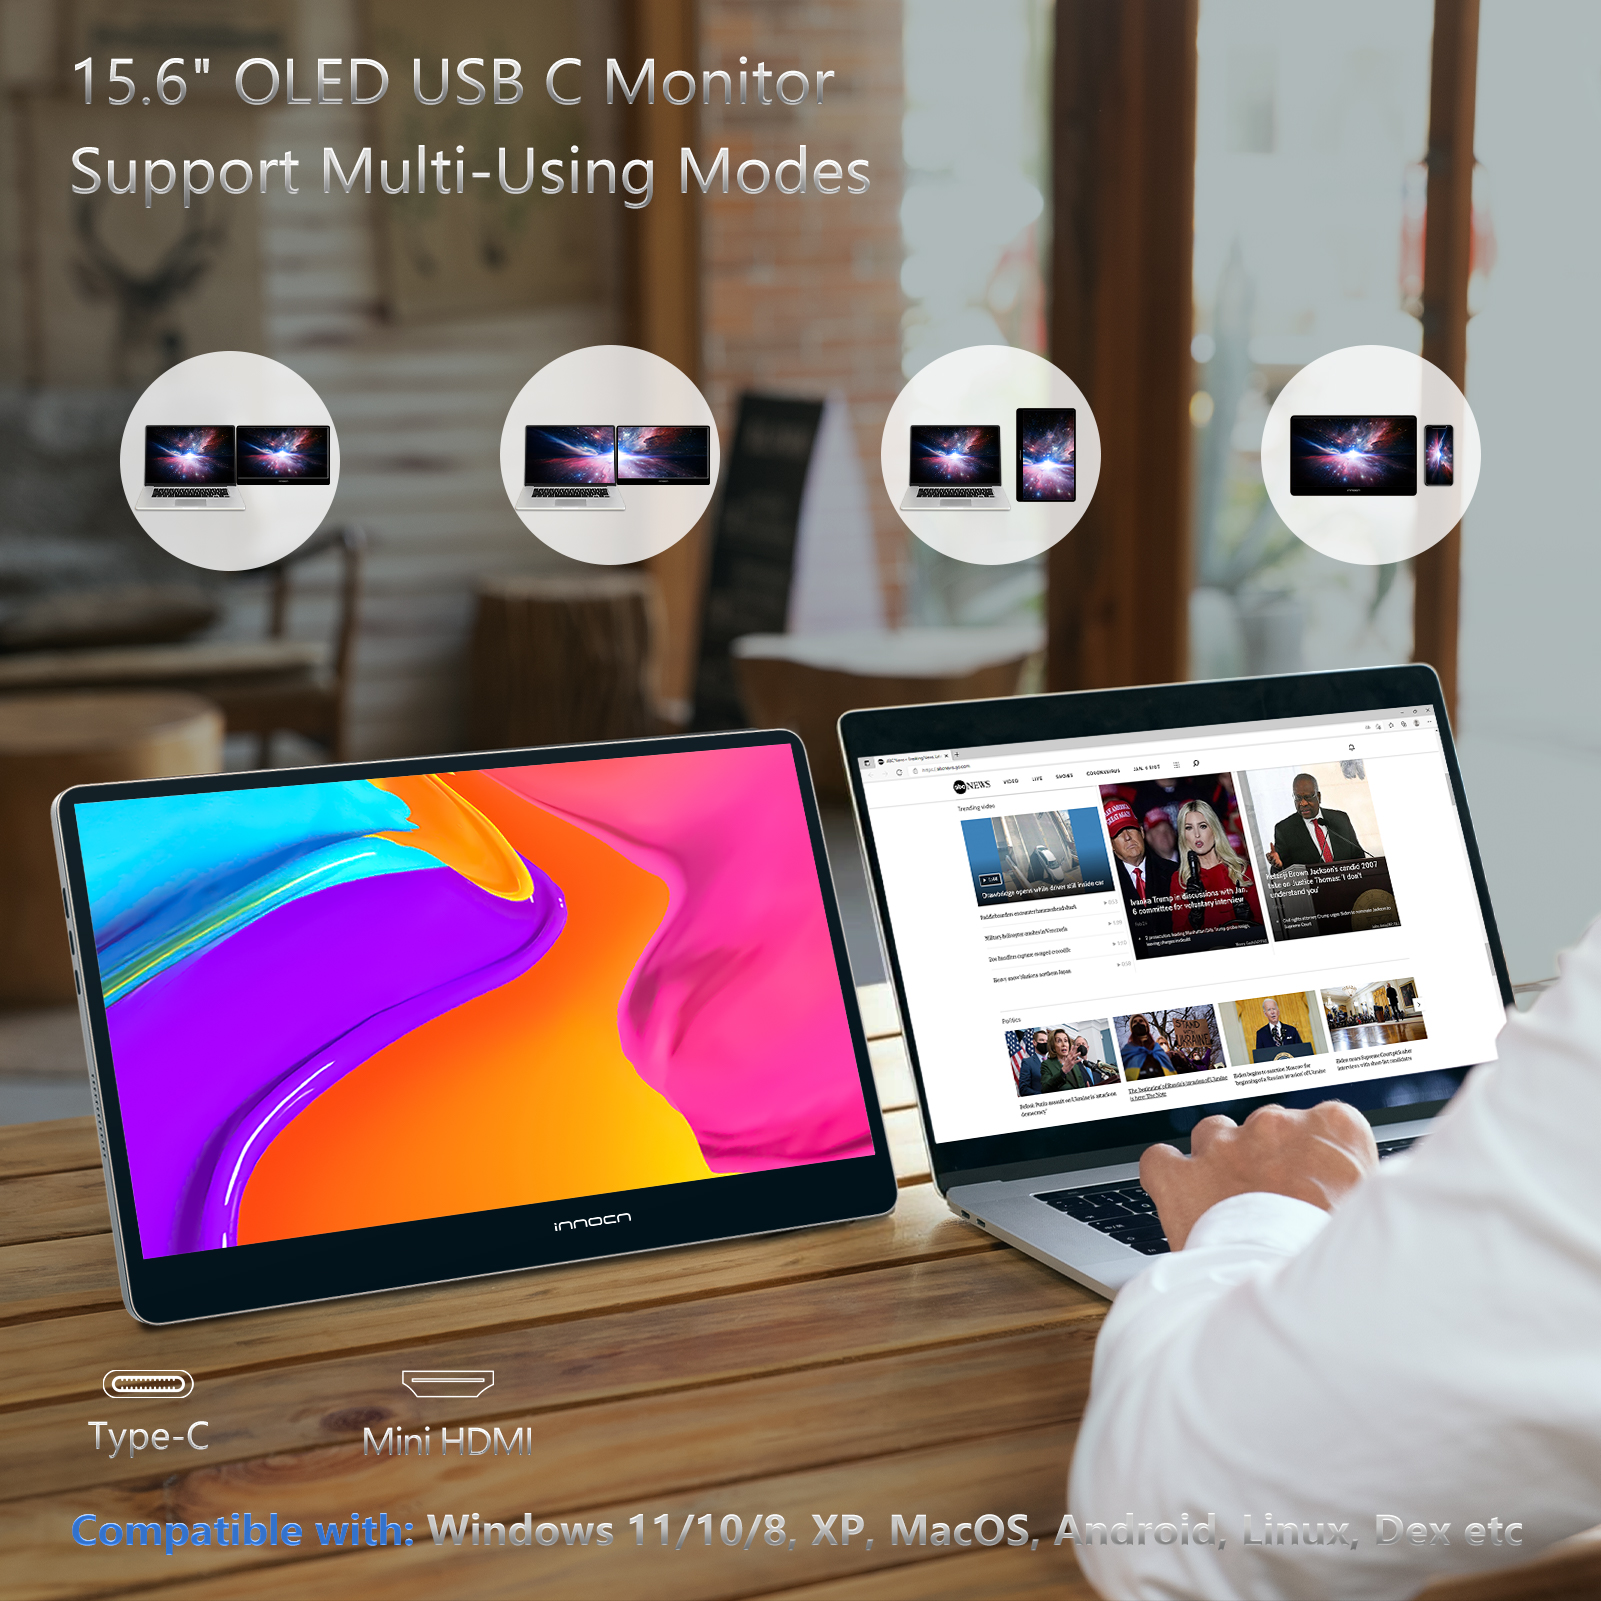 The New OLED Second Screen Monitor 15A1F from INNOCN is